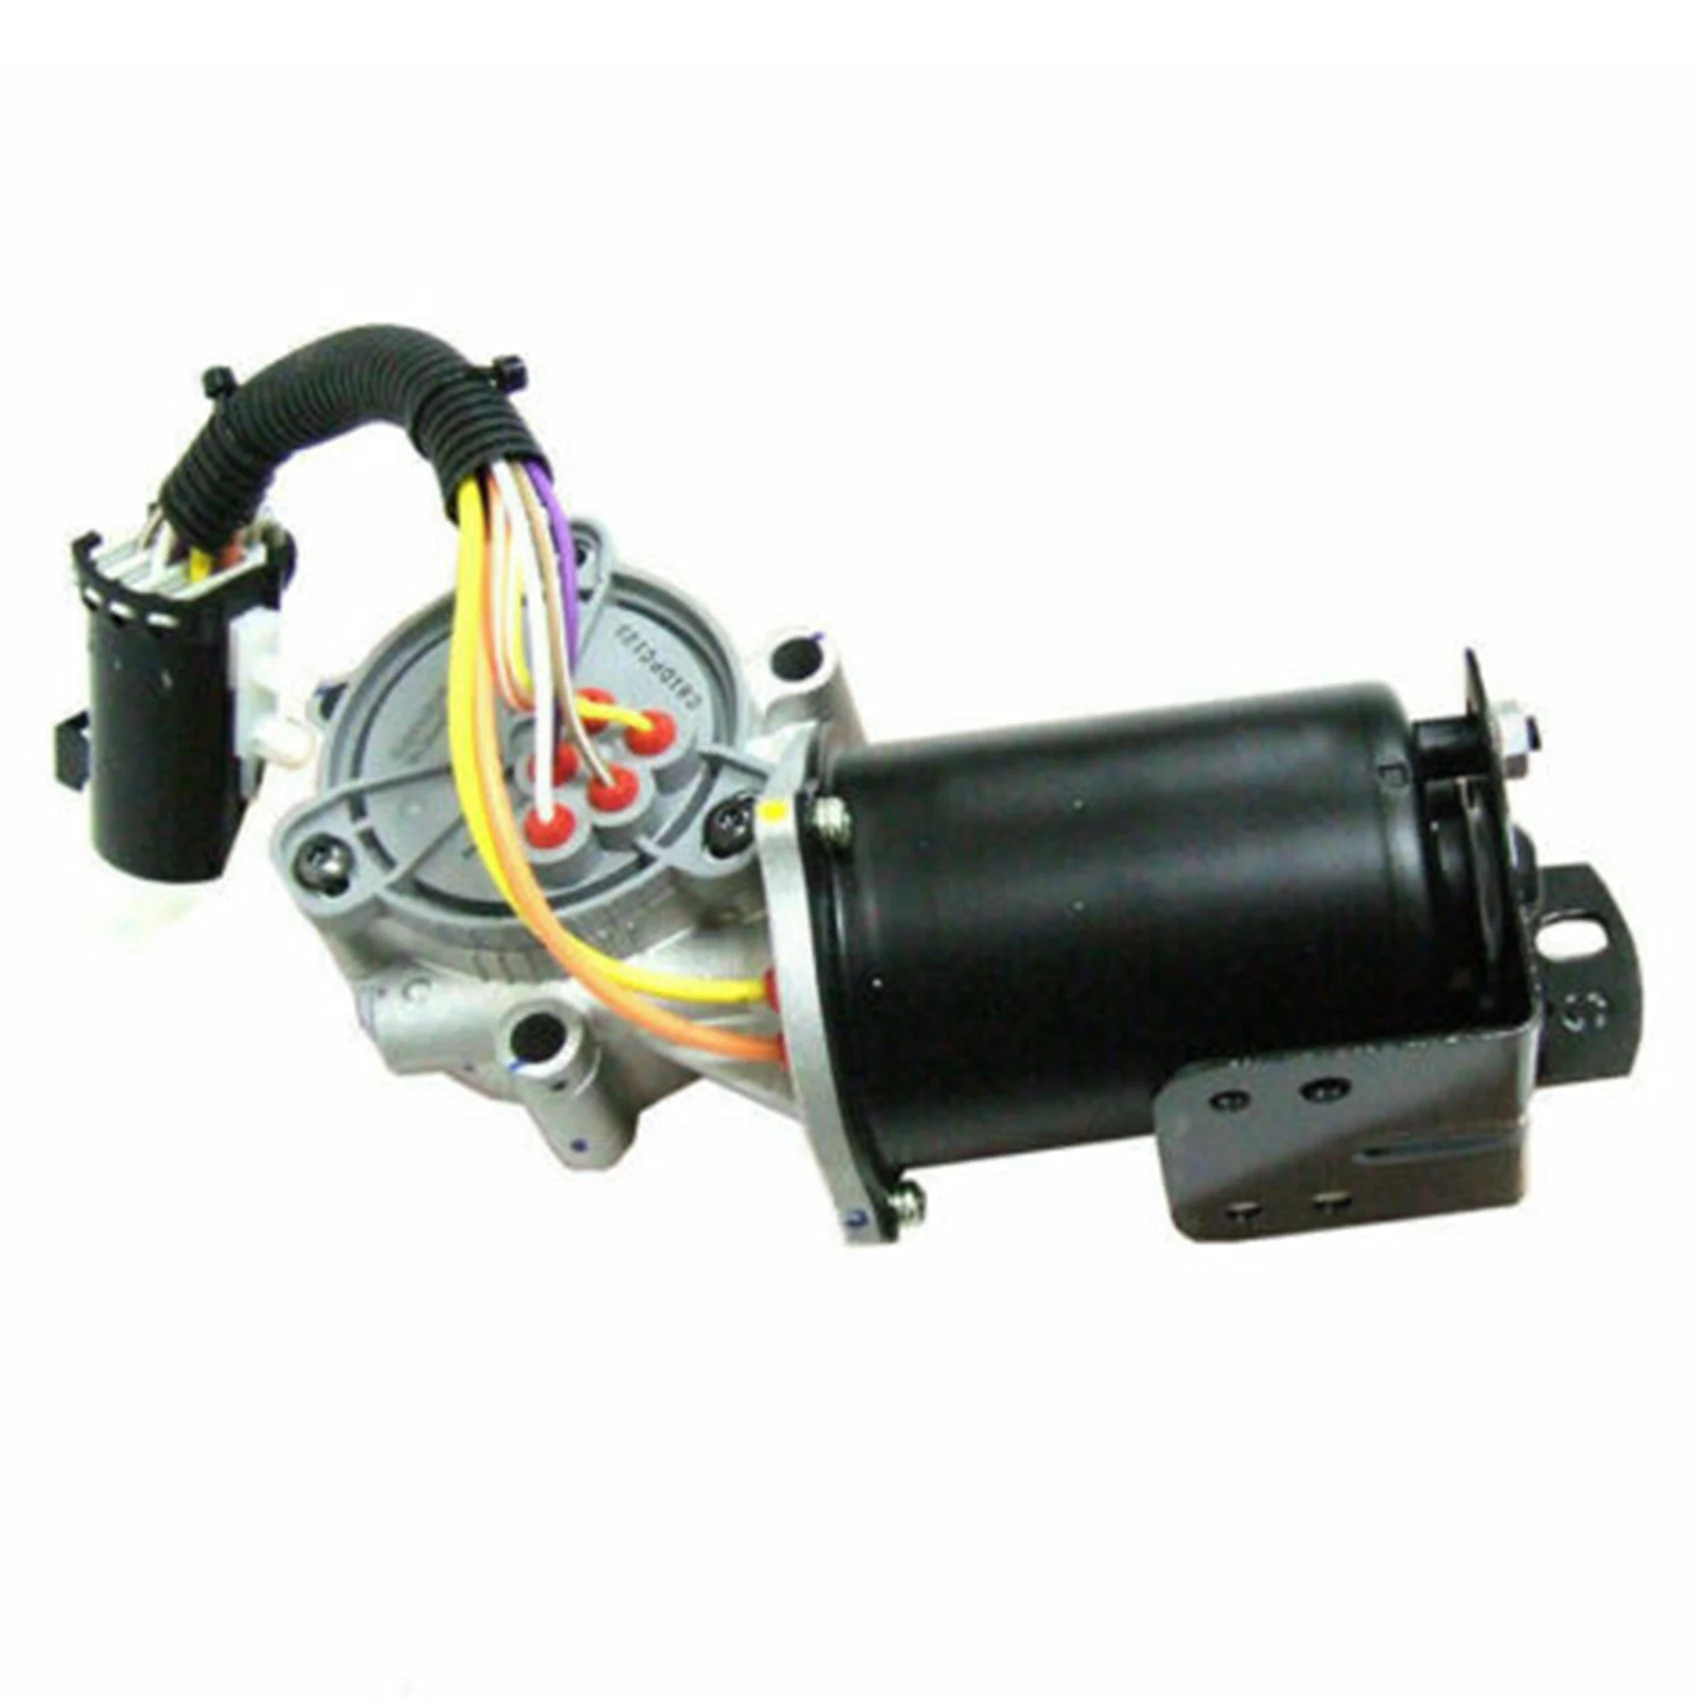 

4408648007 Transfer Control Motor T/C Motor for Ssangyong Musso Sports Korando Rexton 4WD 3255705007 4408648004